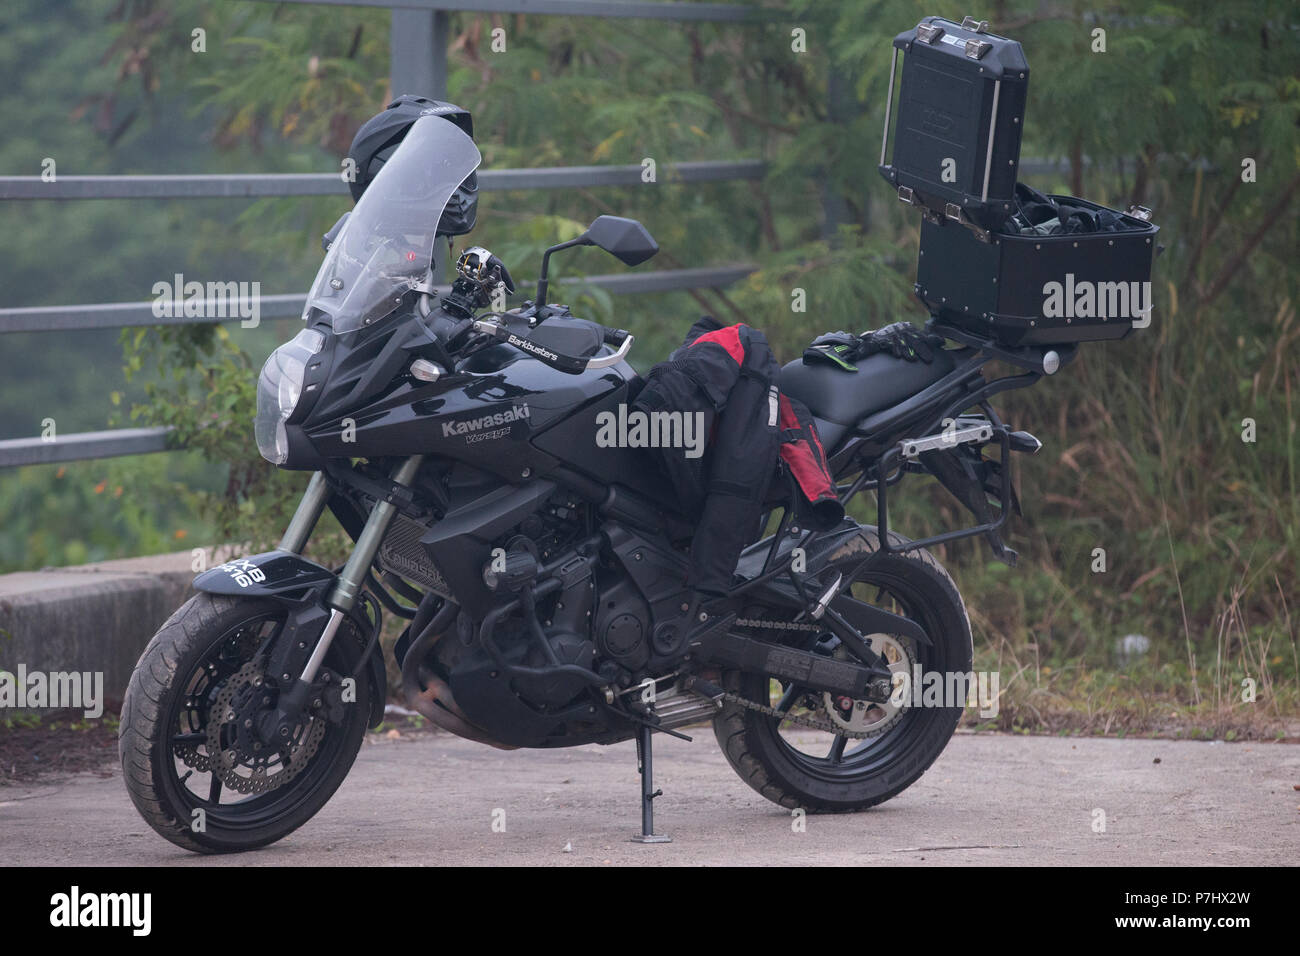 Kawasaki Versys 650 touring motorcycle parked up on the side of the road  Stock Photo - Alamy